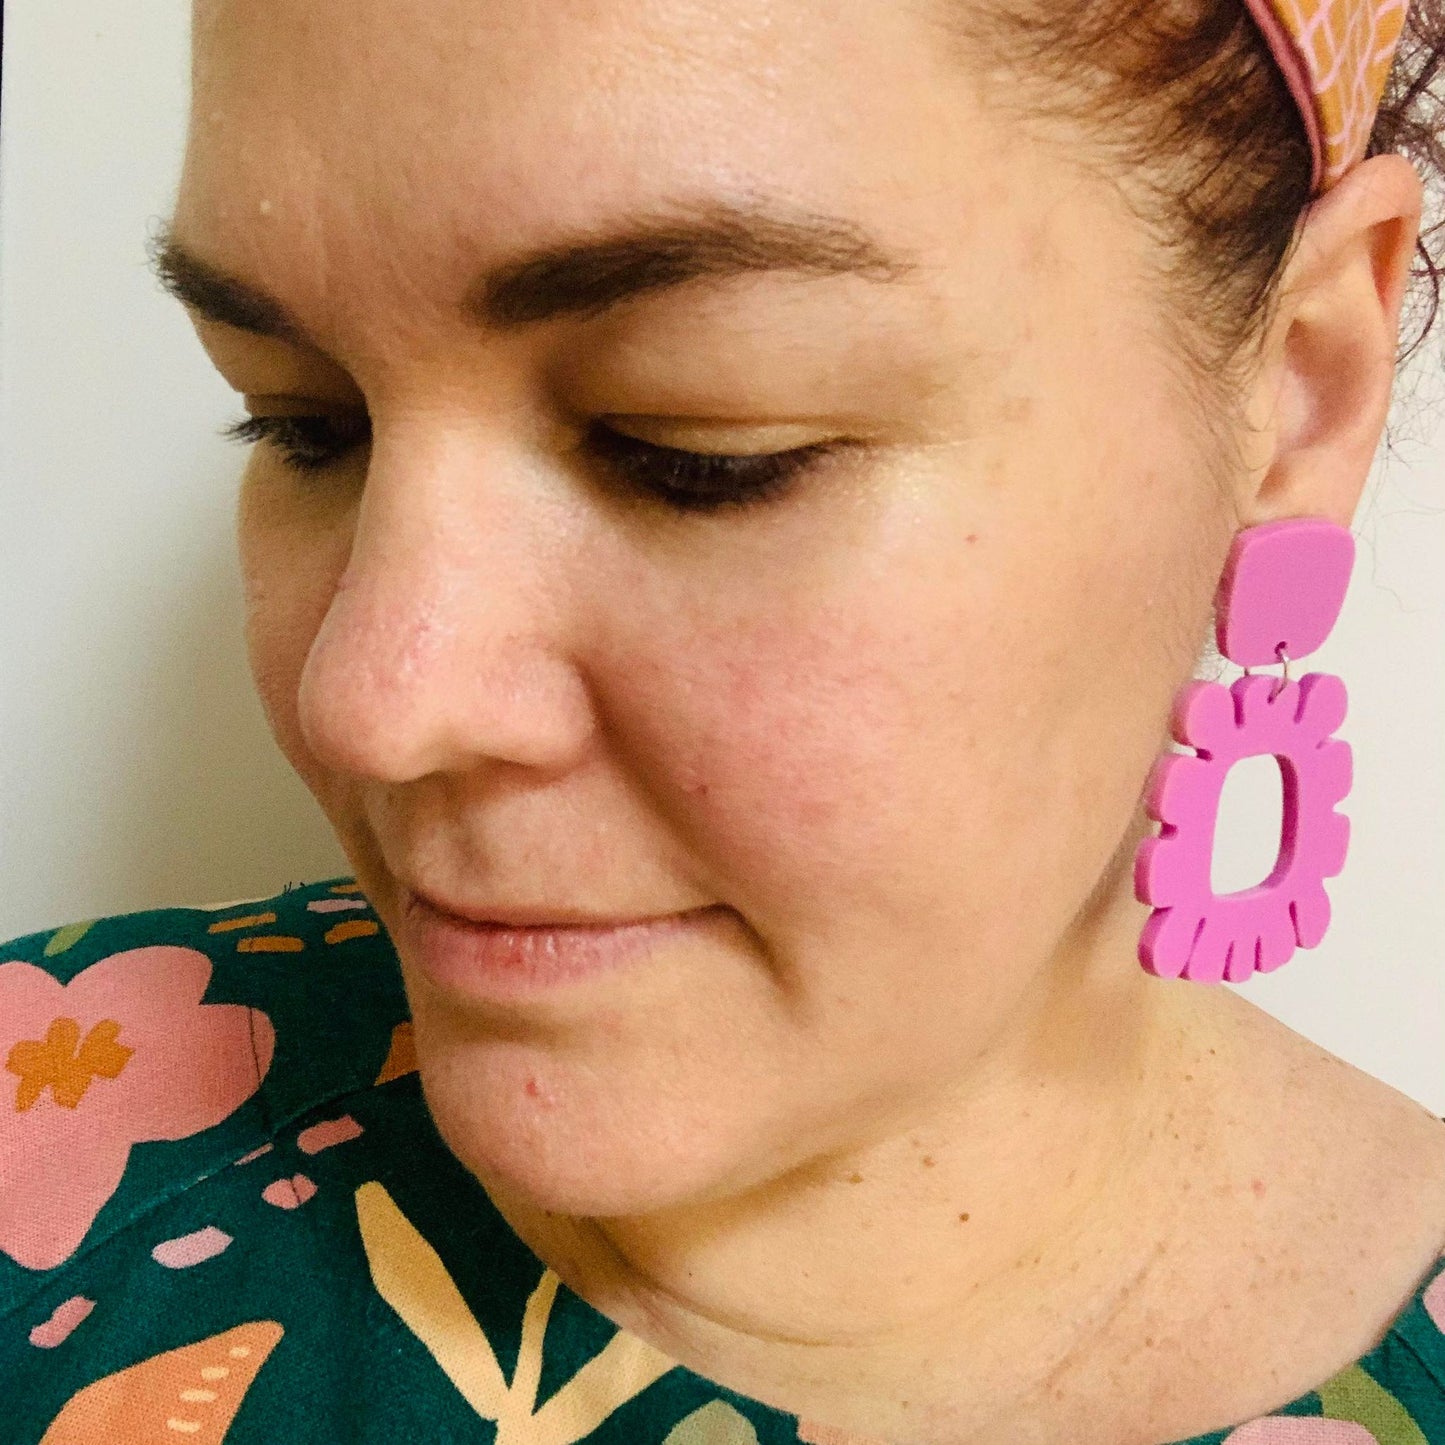 MAKIN' WHOOPEE - "Funky Flowers" - Statement Dangles - Matte Cherry Red